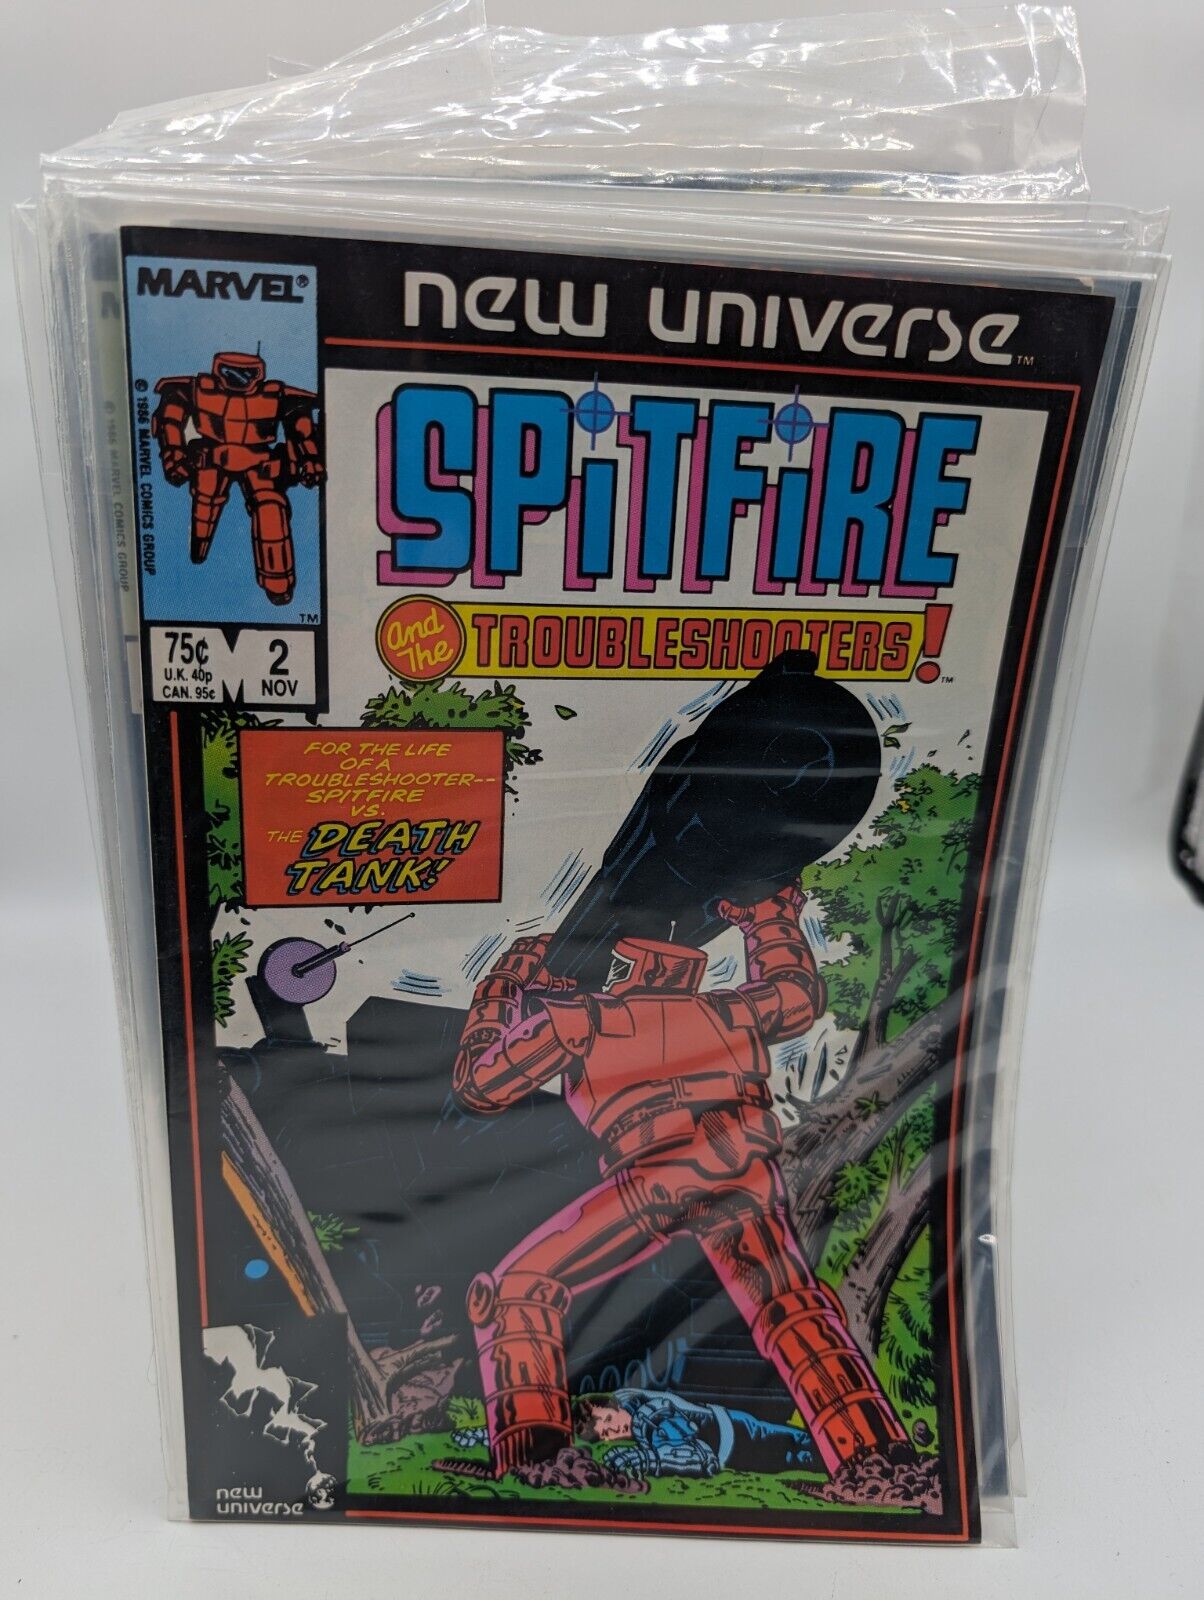 Spitfire and the Troubleshooters #2 Marvel Comics (1986) 